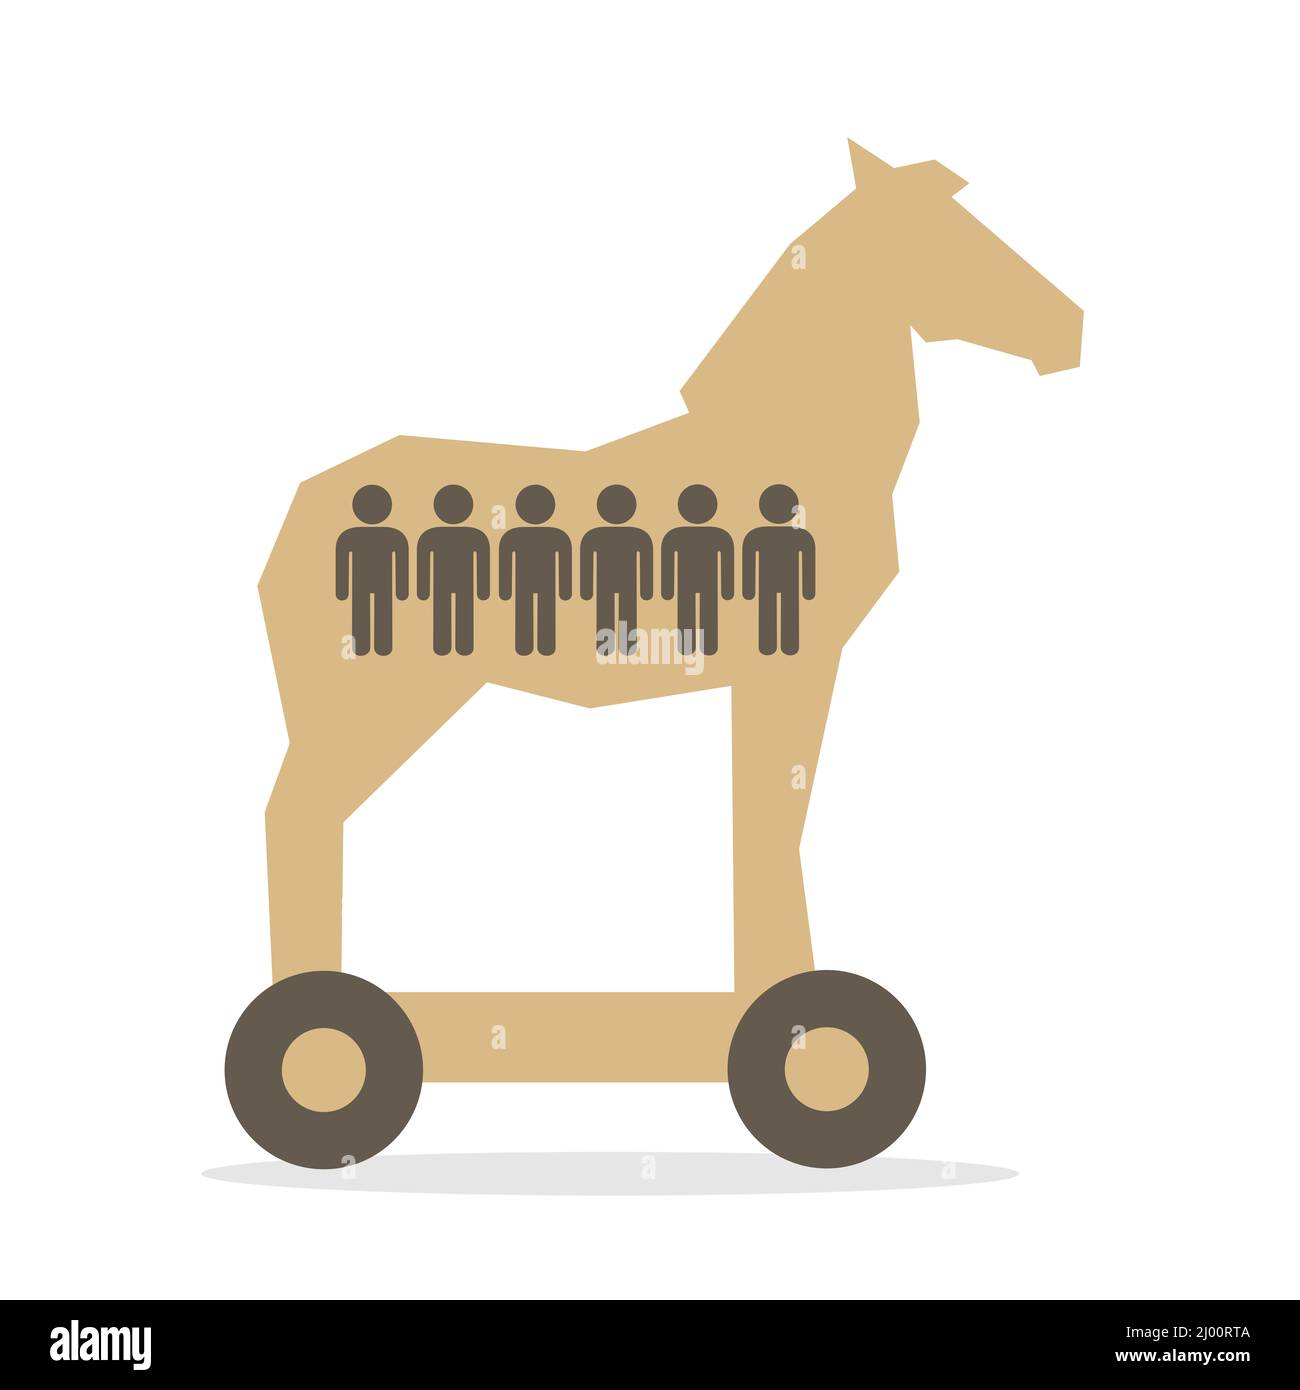 Trojan horse - deceitful trap and deception by hostile enemy. Tricky war and military. Vector illustration isolated on white. Stock Photo